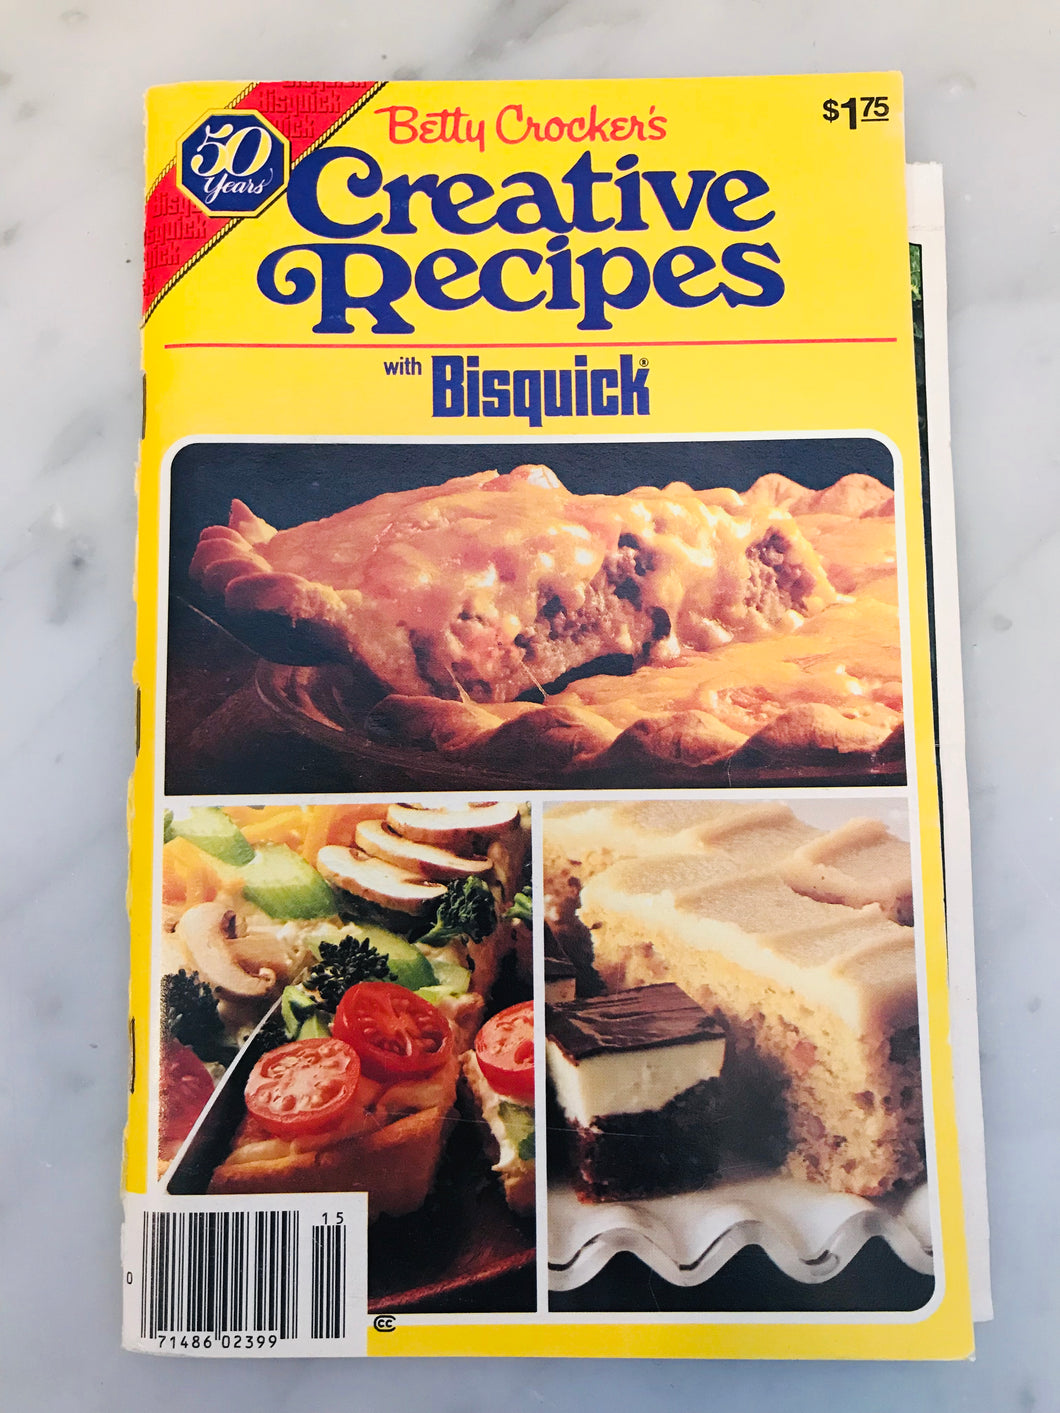 Betty Crocker's Creative Recipes with Bisquick